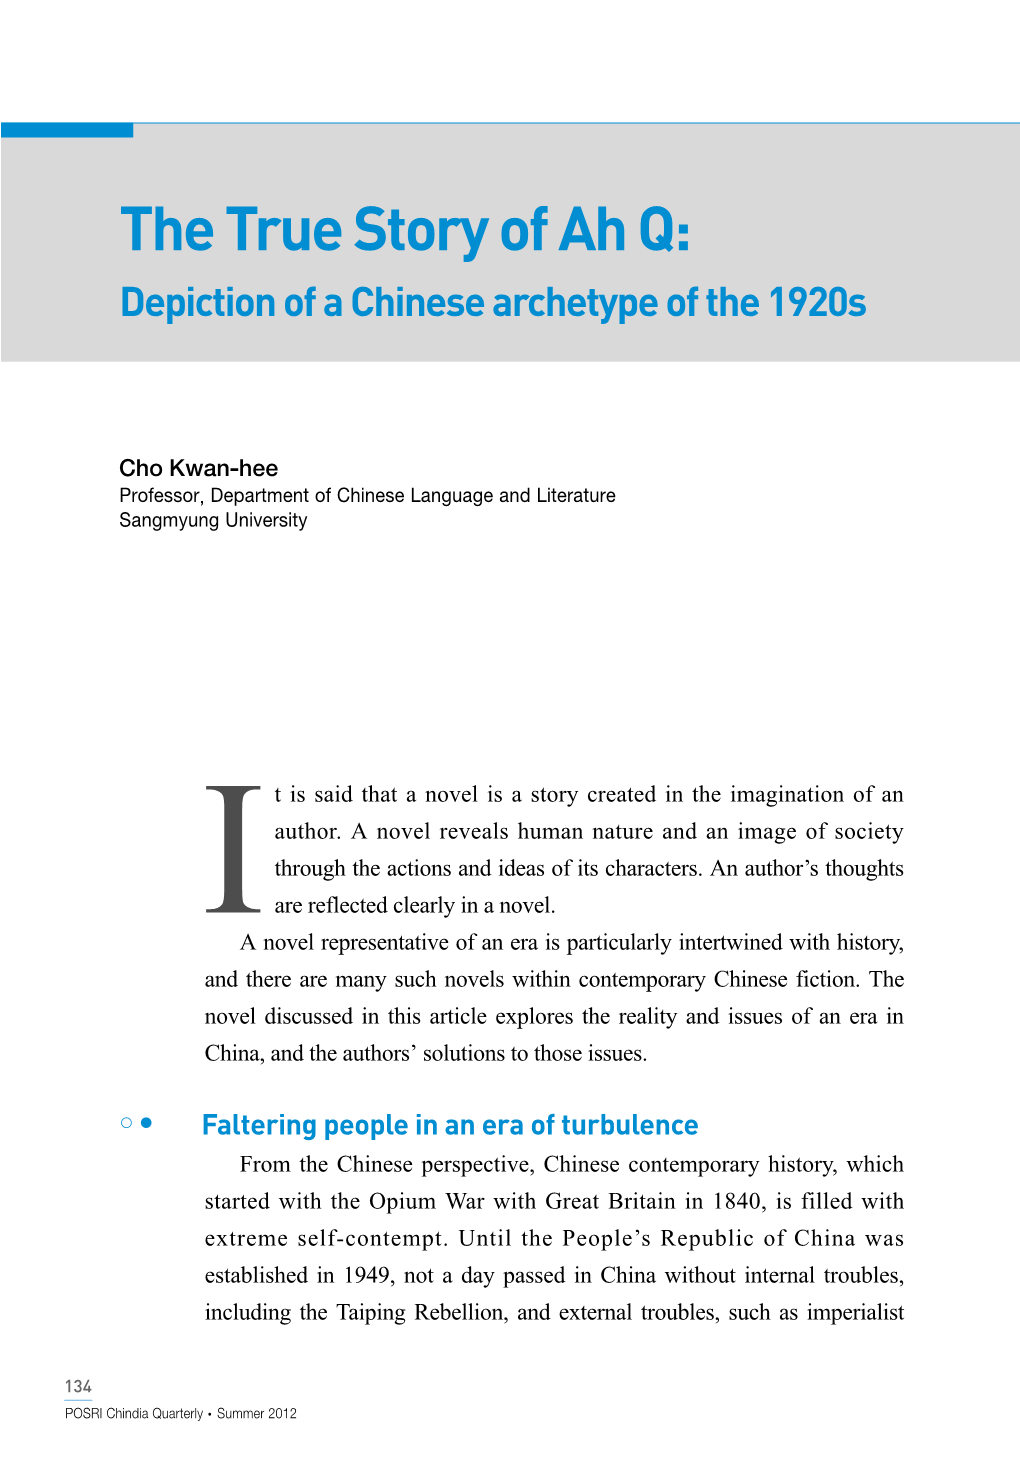 The True Story of Ah Q: Depiction of a Chinese Archetype of the 1920S